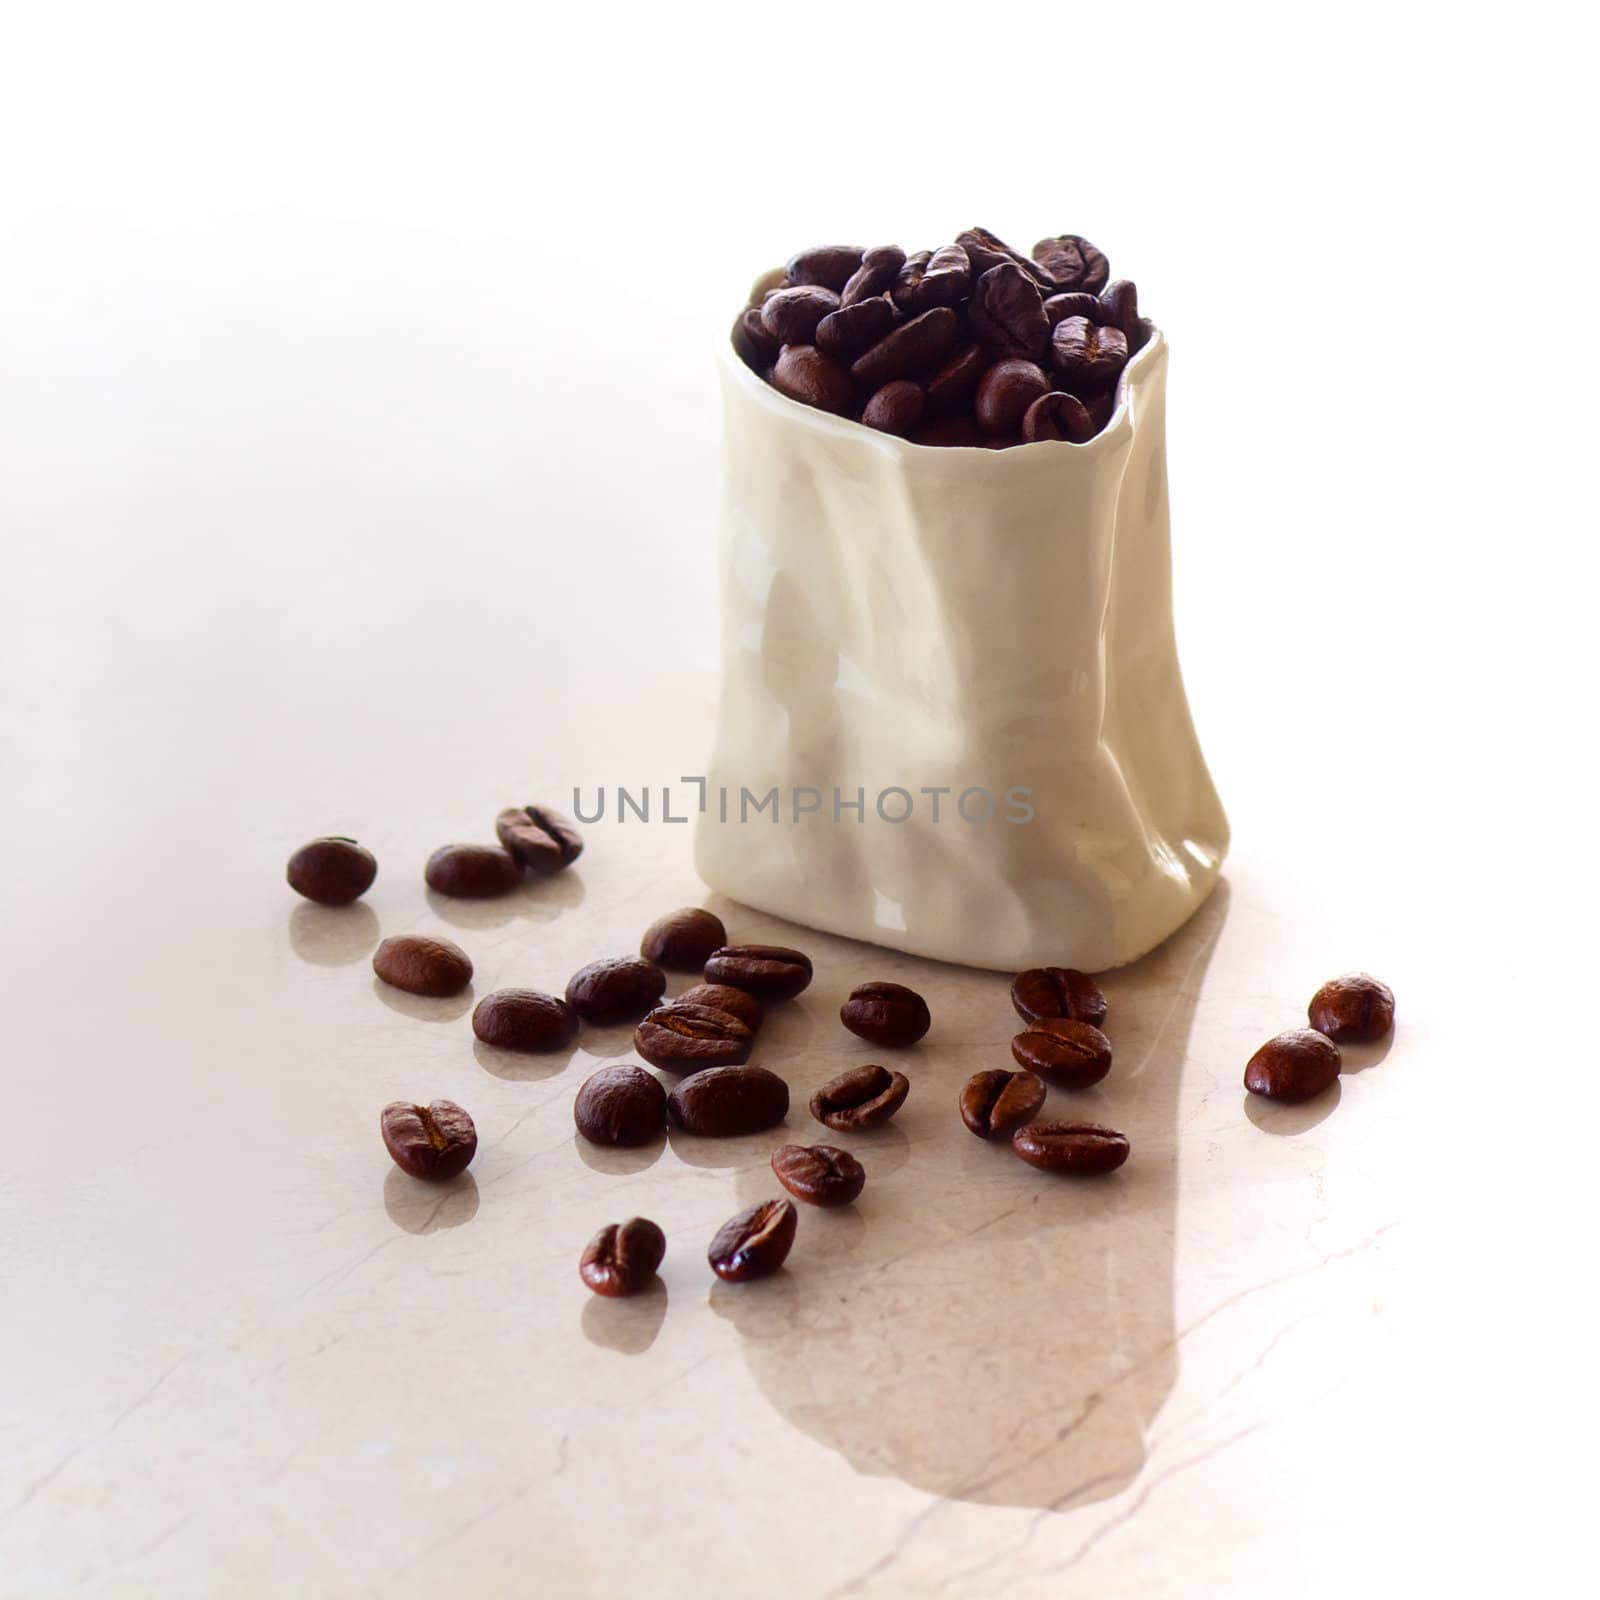 A ceramic bag filled with coffee beans spilling onto a marble surface in square format